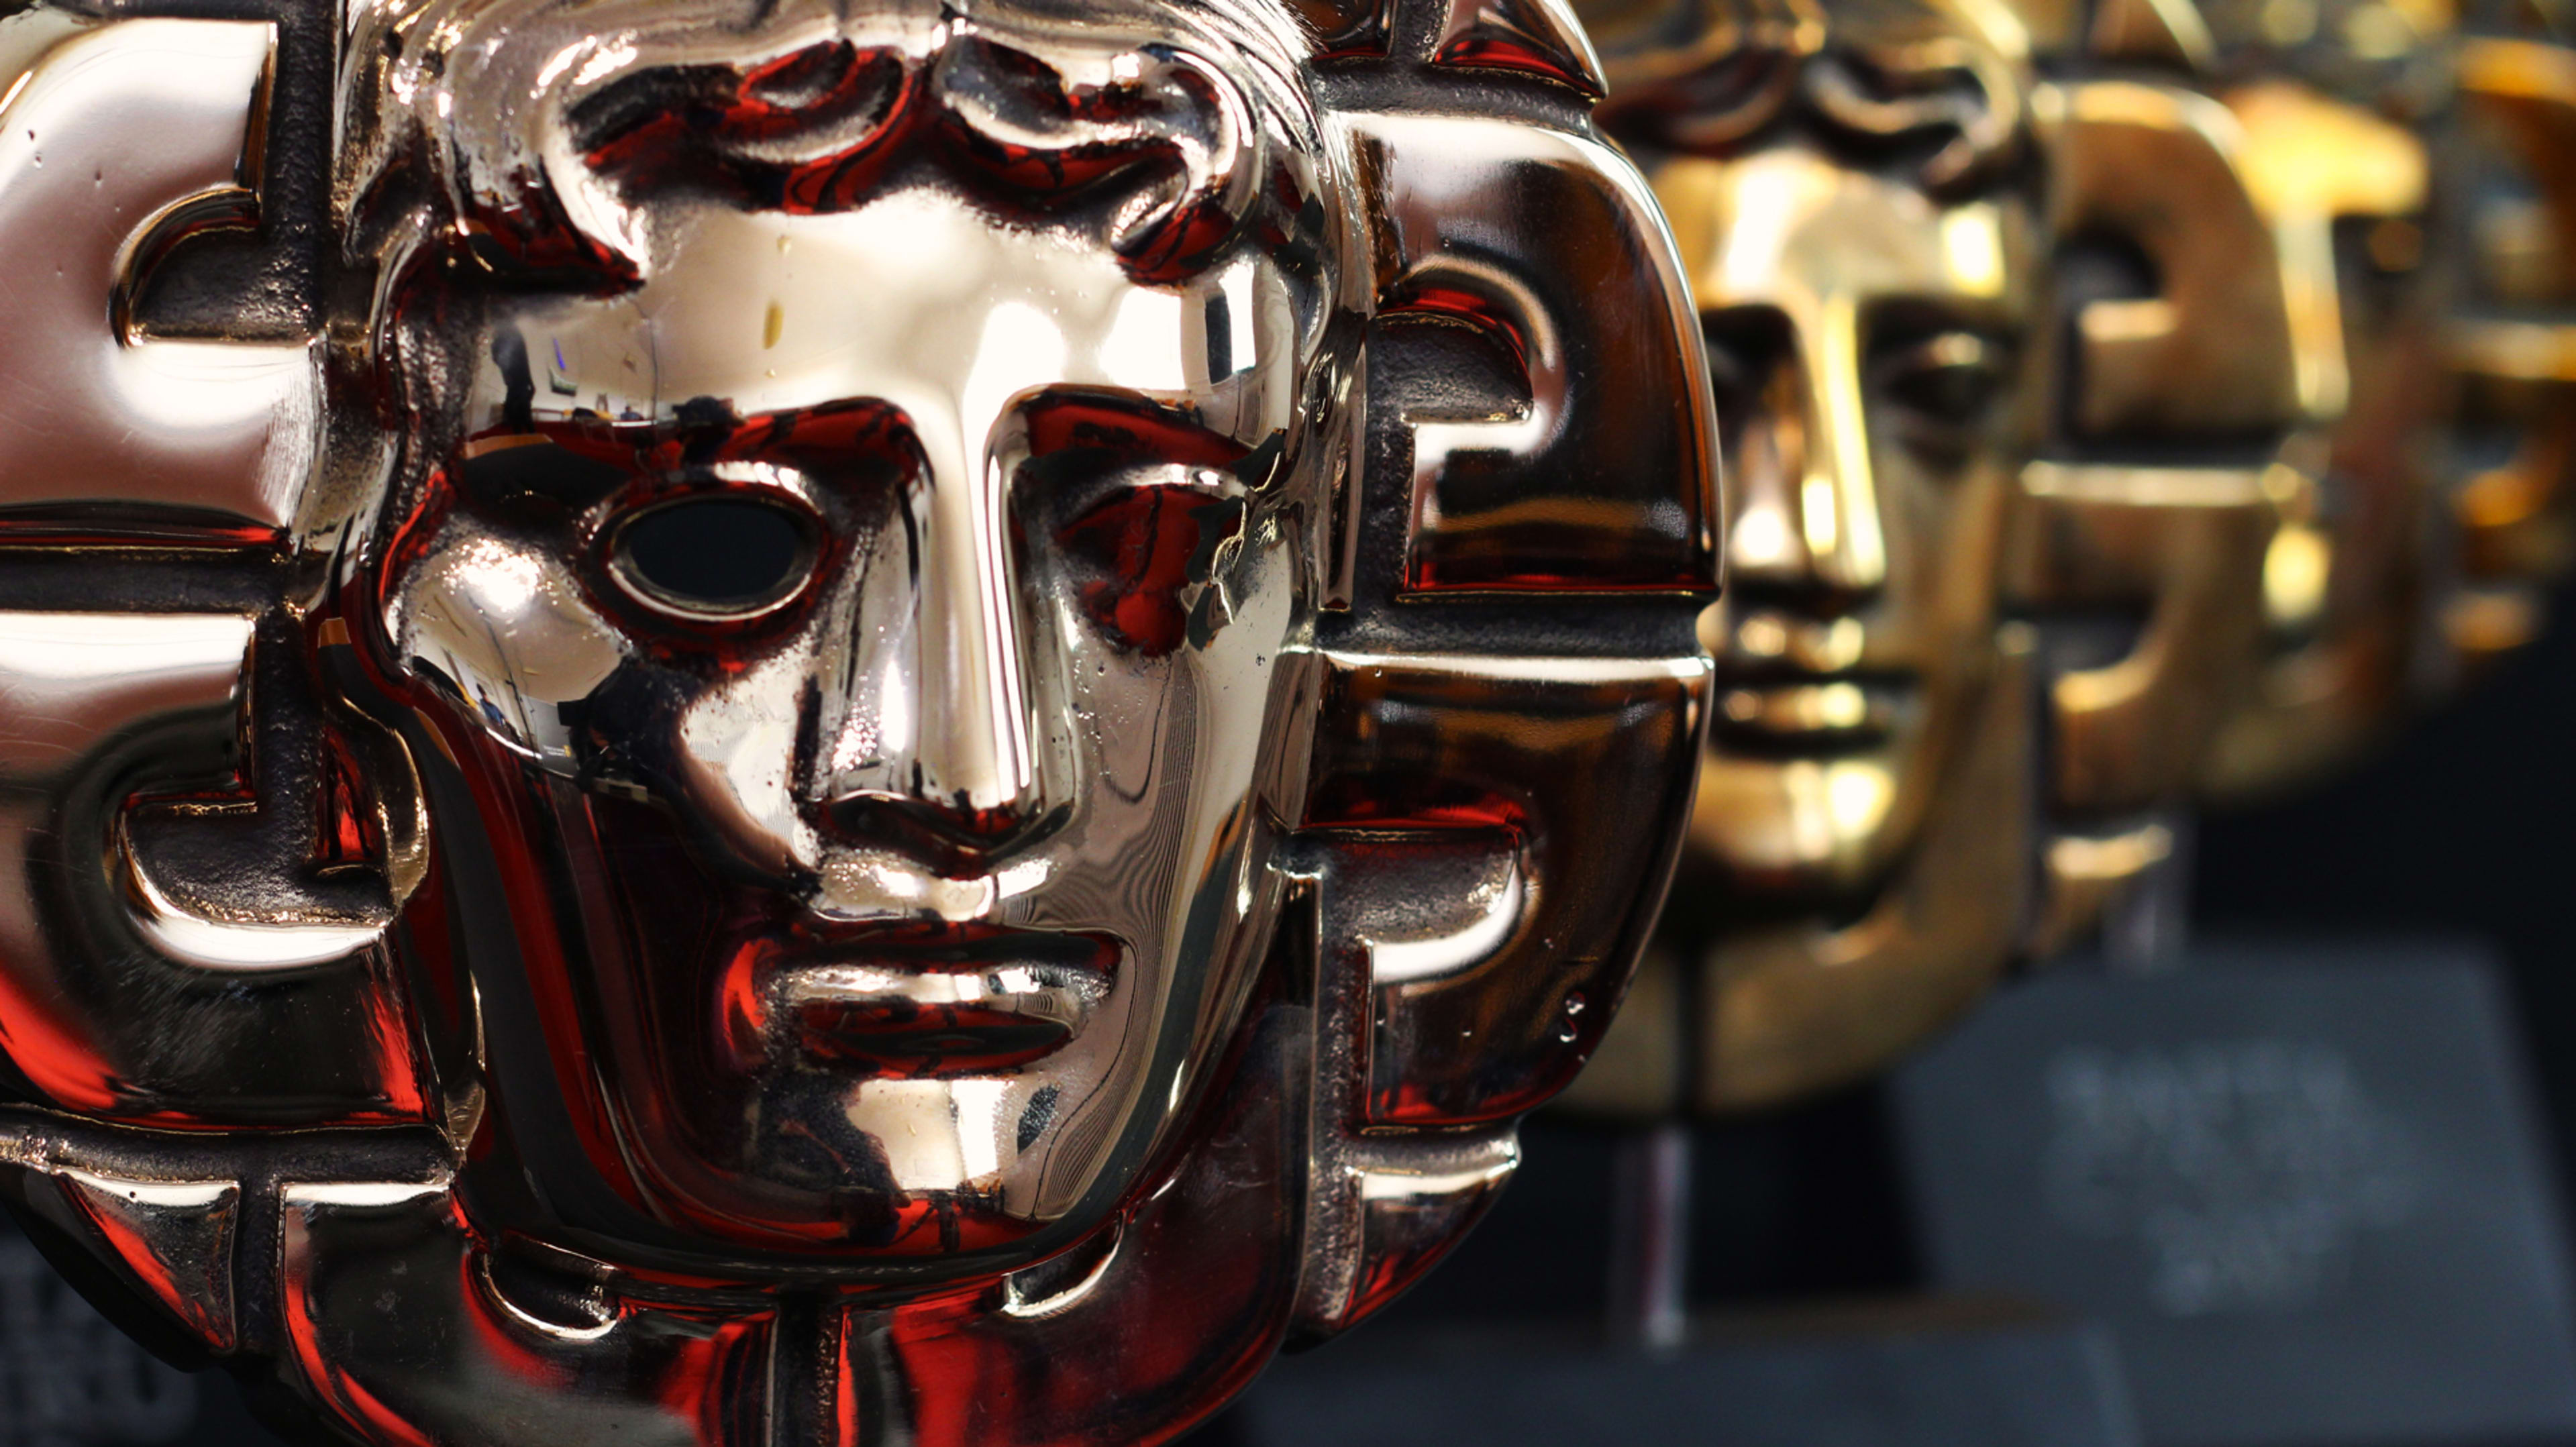 How to watch the 2019 BAFTA awards on BBC America without cable